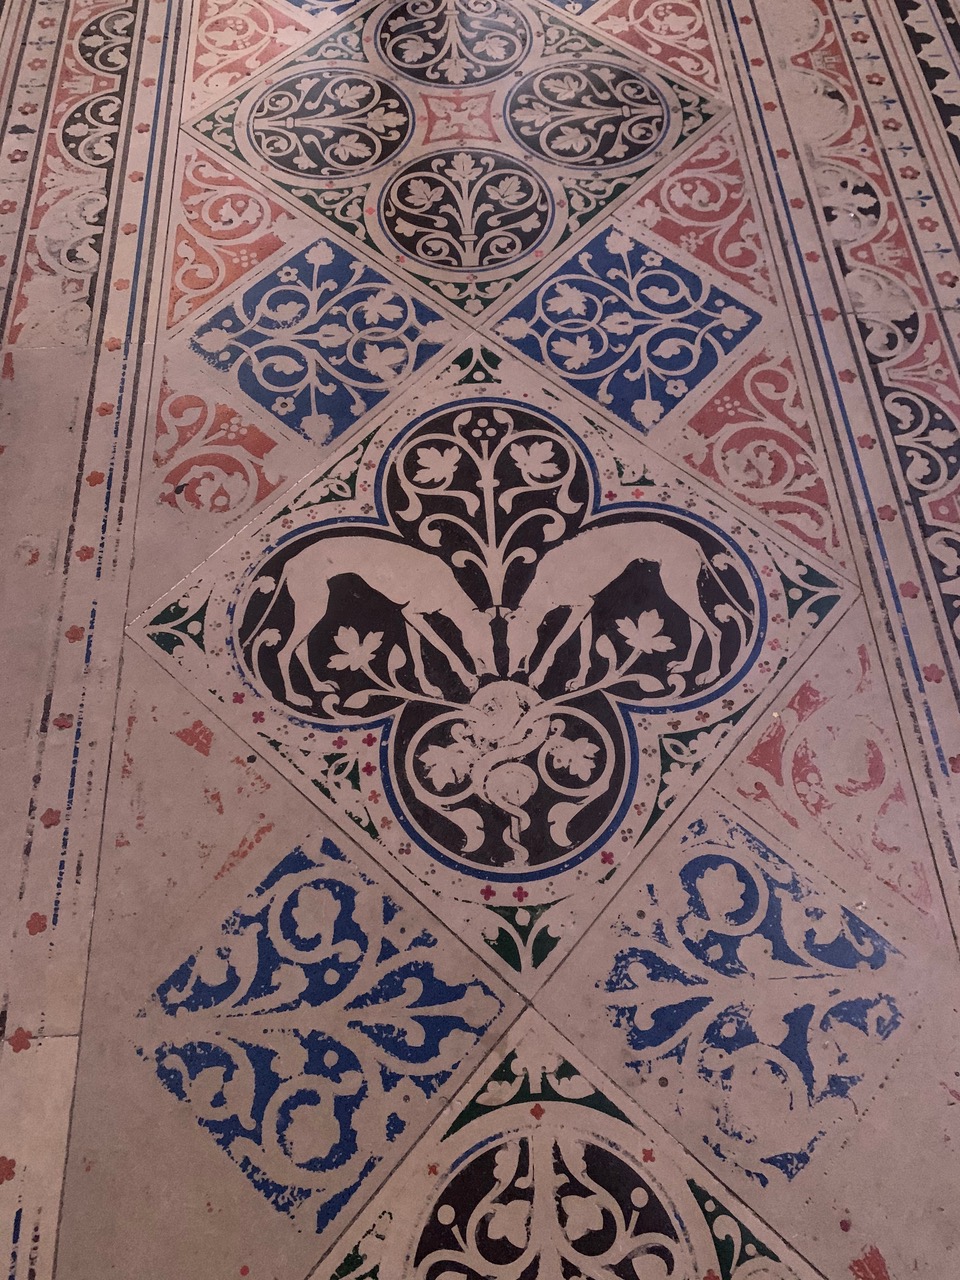 Red, blue and black patterns on the floor of Saint-Chapelle